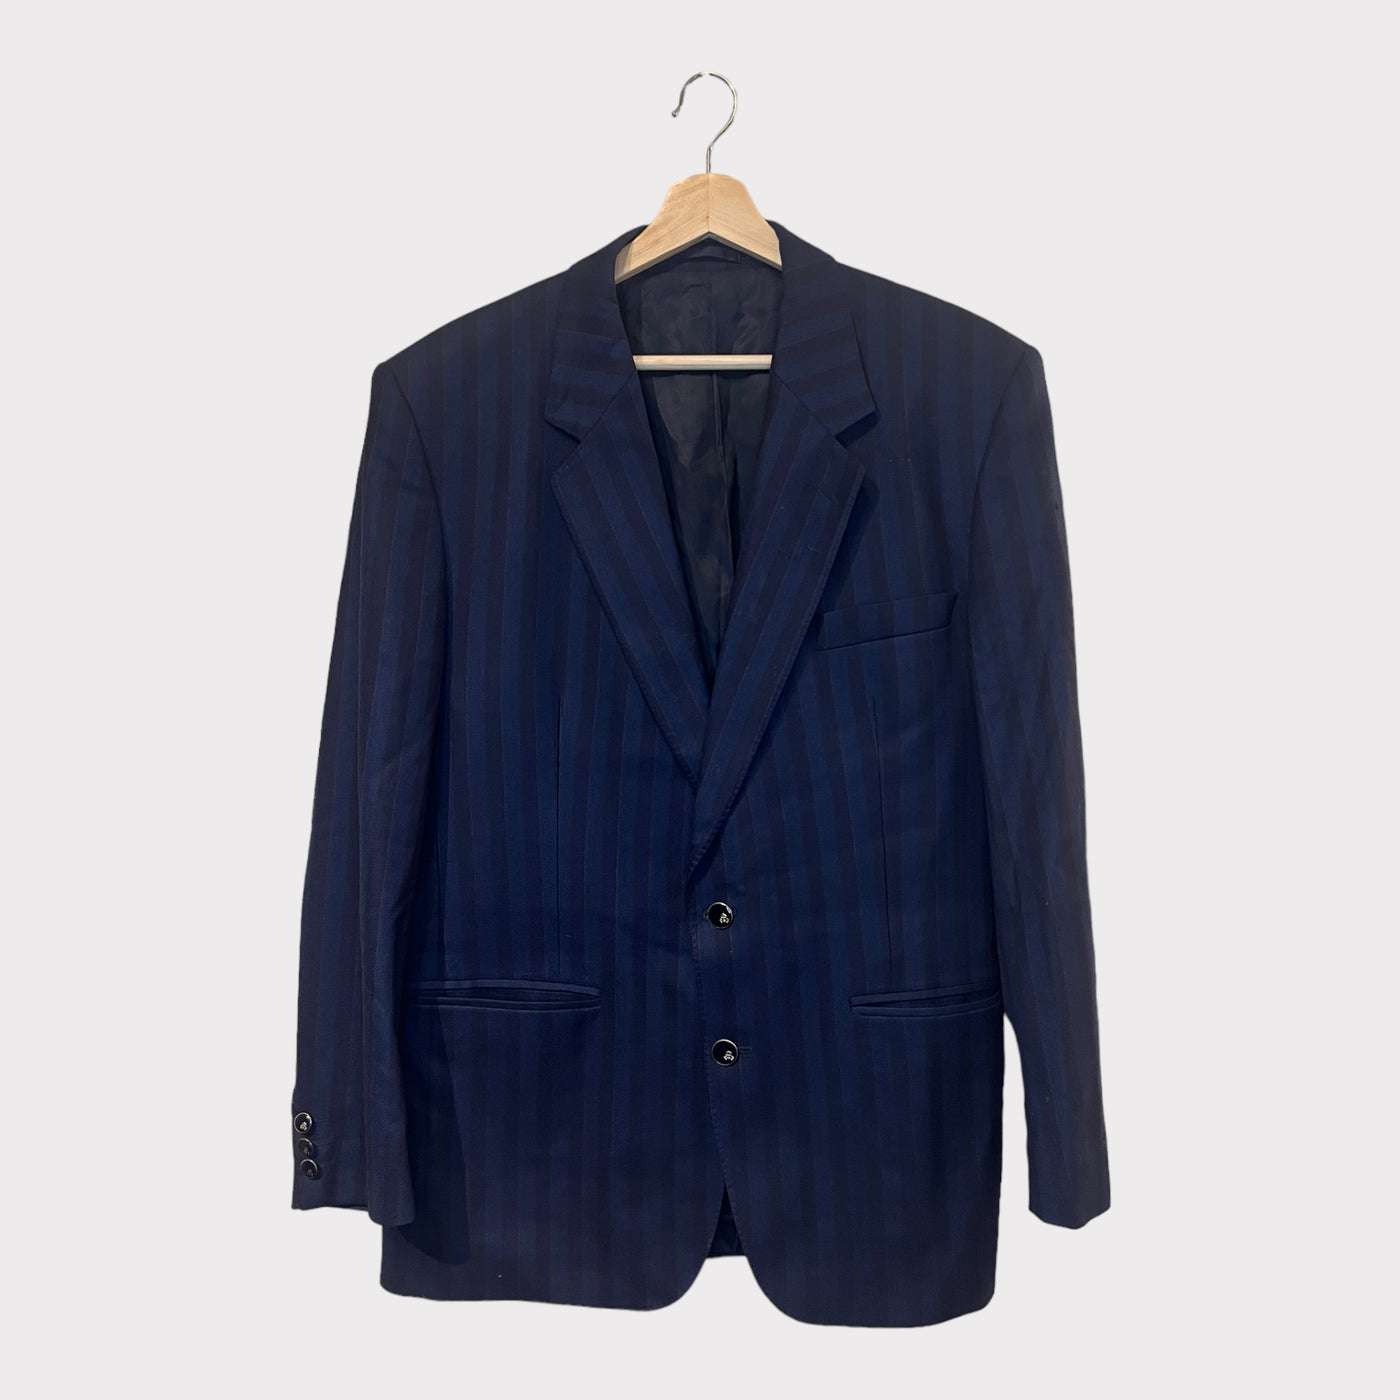 Striped Blazer With Swedish Crown Buttons Front